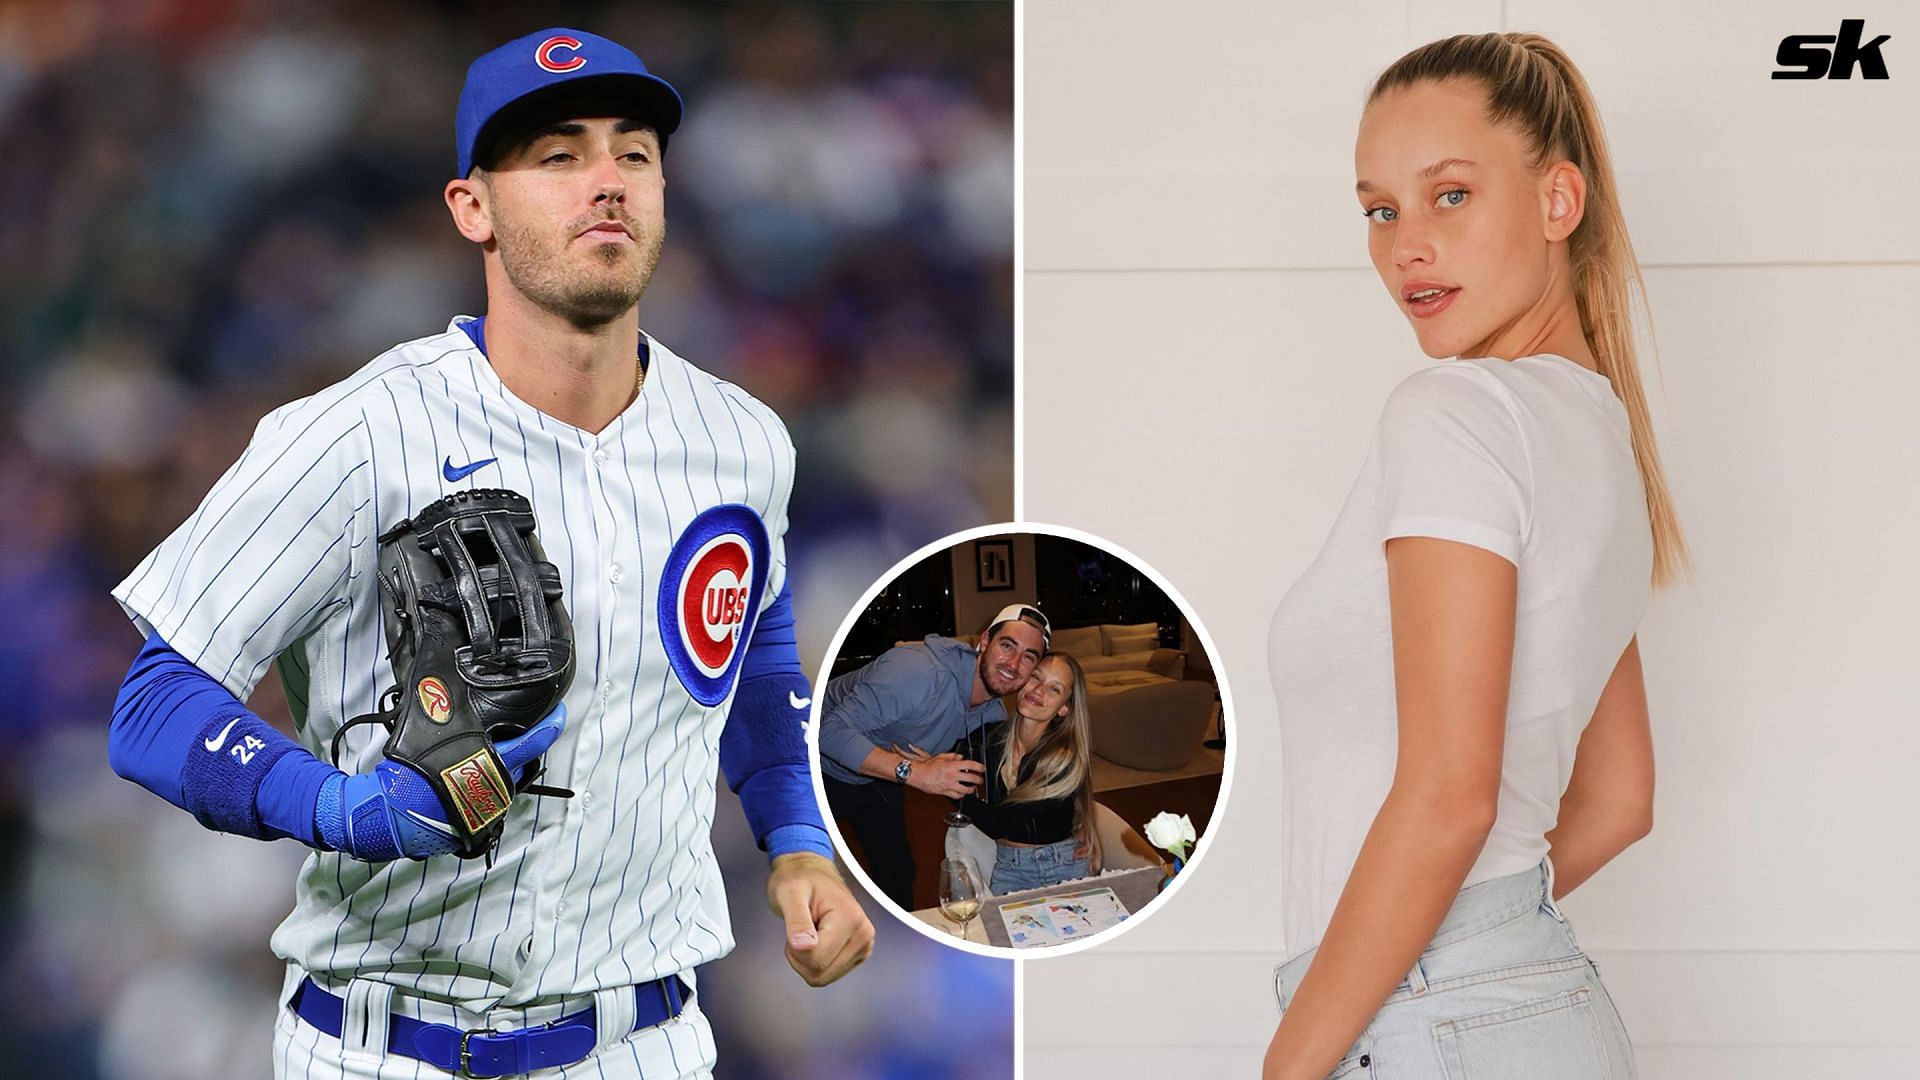 Chase Carter shares date night picture with Cody Bellinger